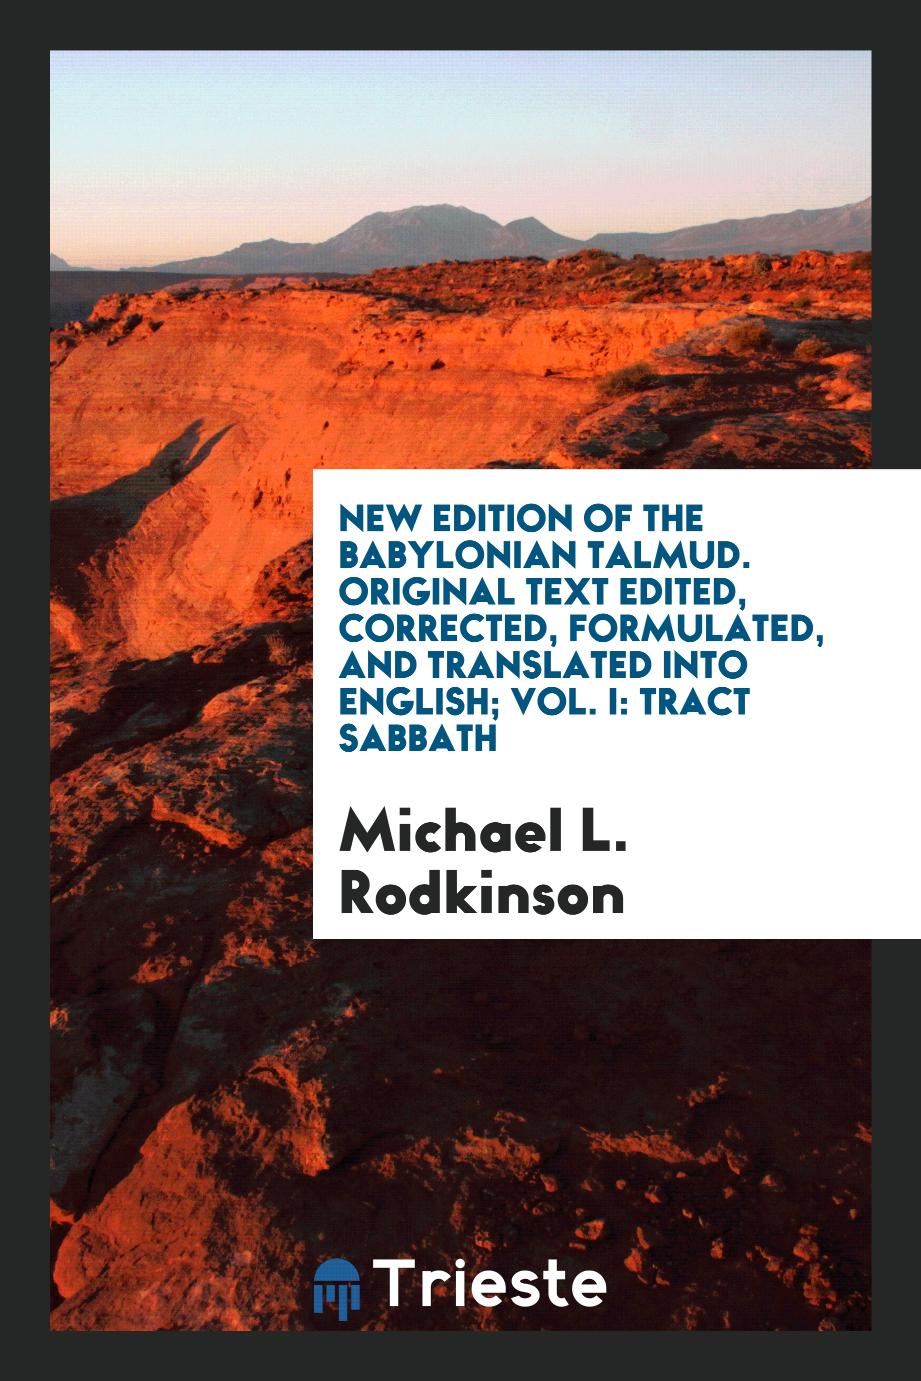 New edition of the Babylonian Talmud. Original text edited, corrected, formulated, and translated into English; Vol. I: Tract Sabbath